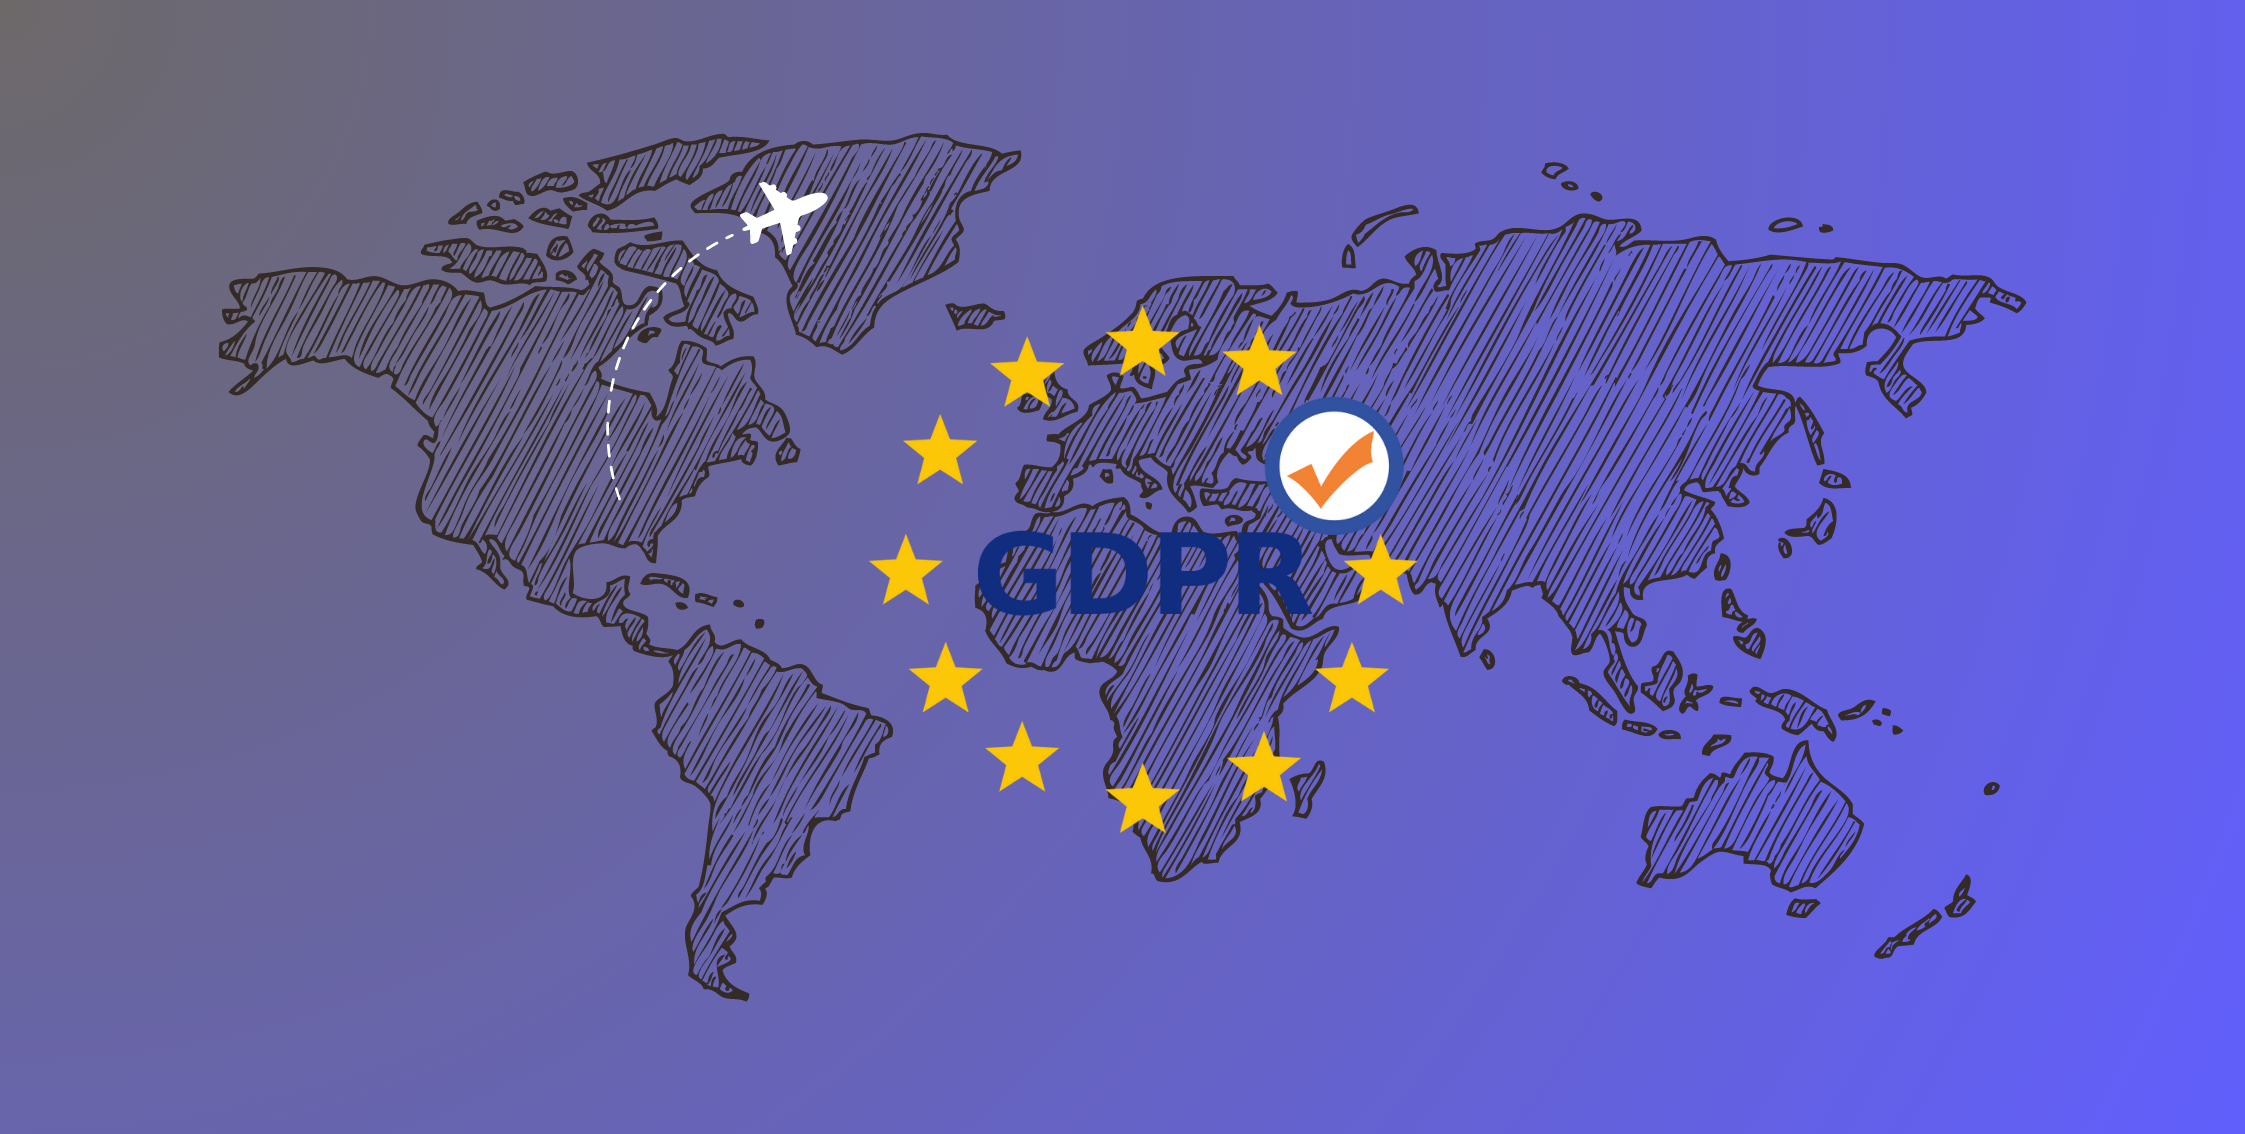 How Does Google Analytics 4 Improve Data Privacy? - GDPR Compliance